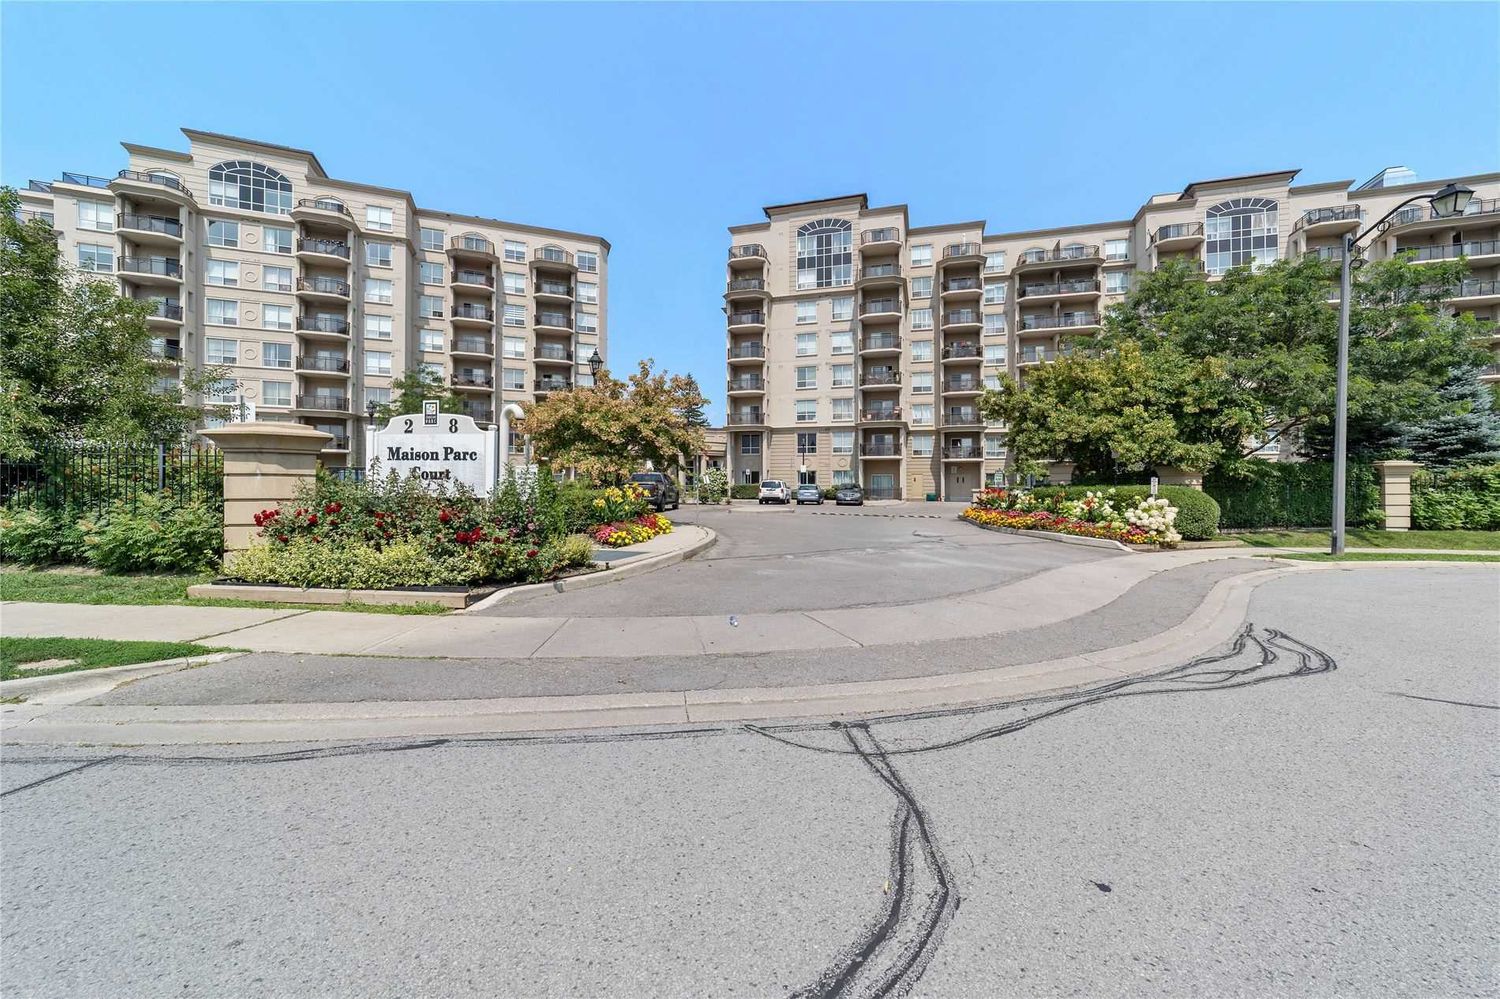 2 Maison Parc Court. Chateau Park Condos is located in  Vaughan, Toronto - image #1 of 2